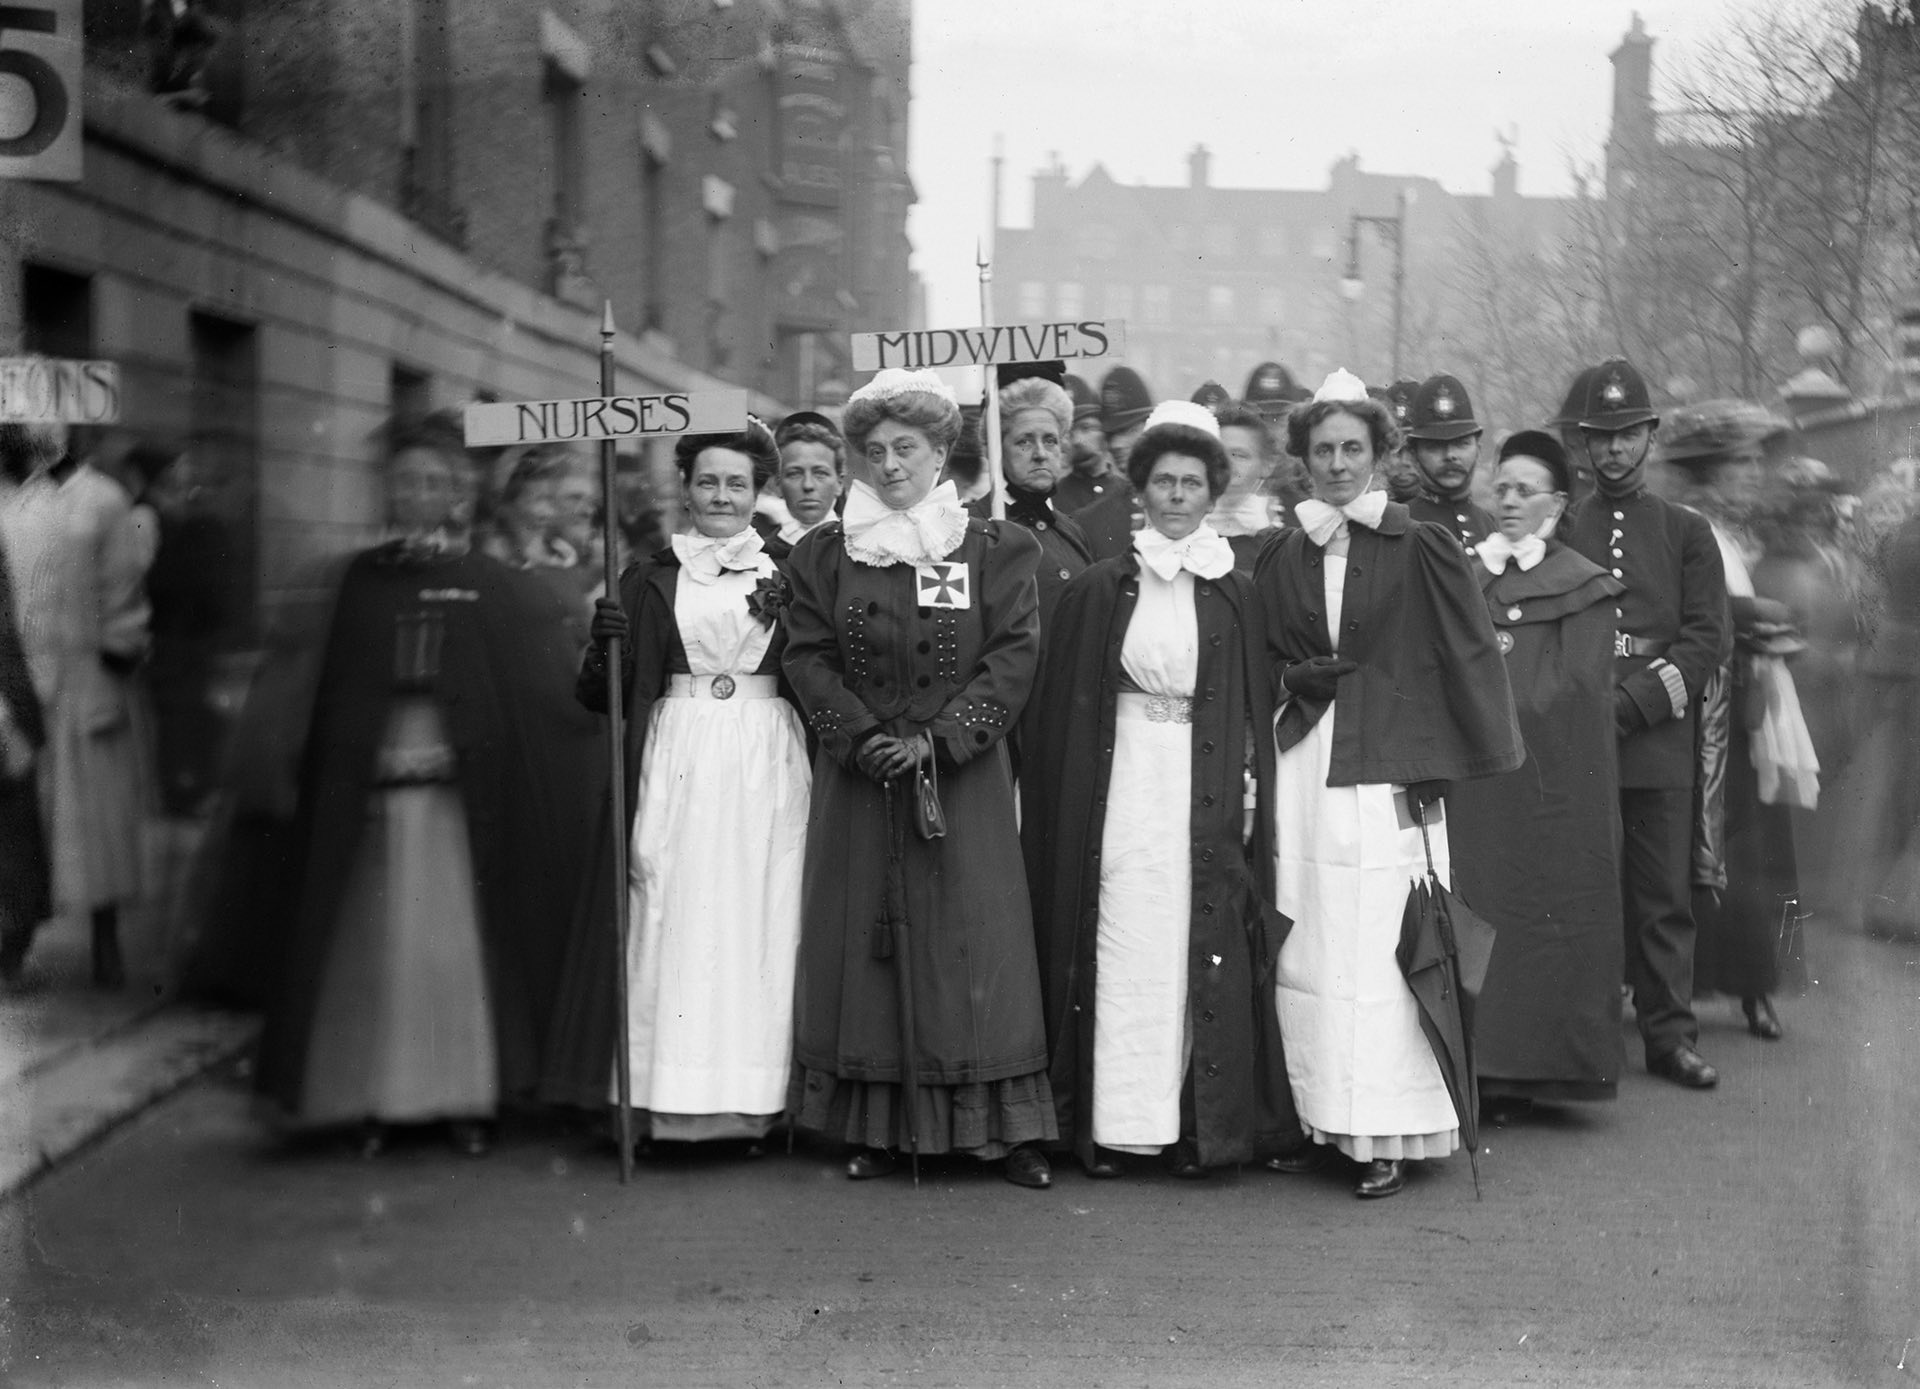 #picturethis: Soldiers in petticoats: portraits of the suffragettes